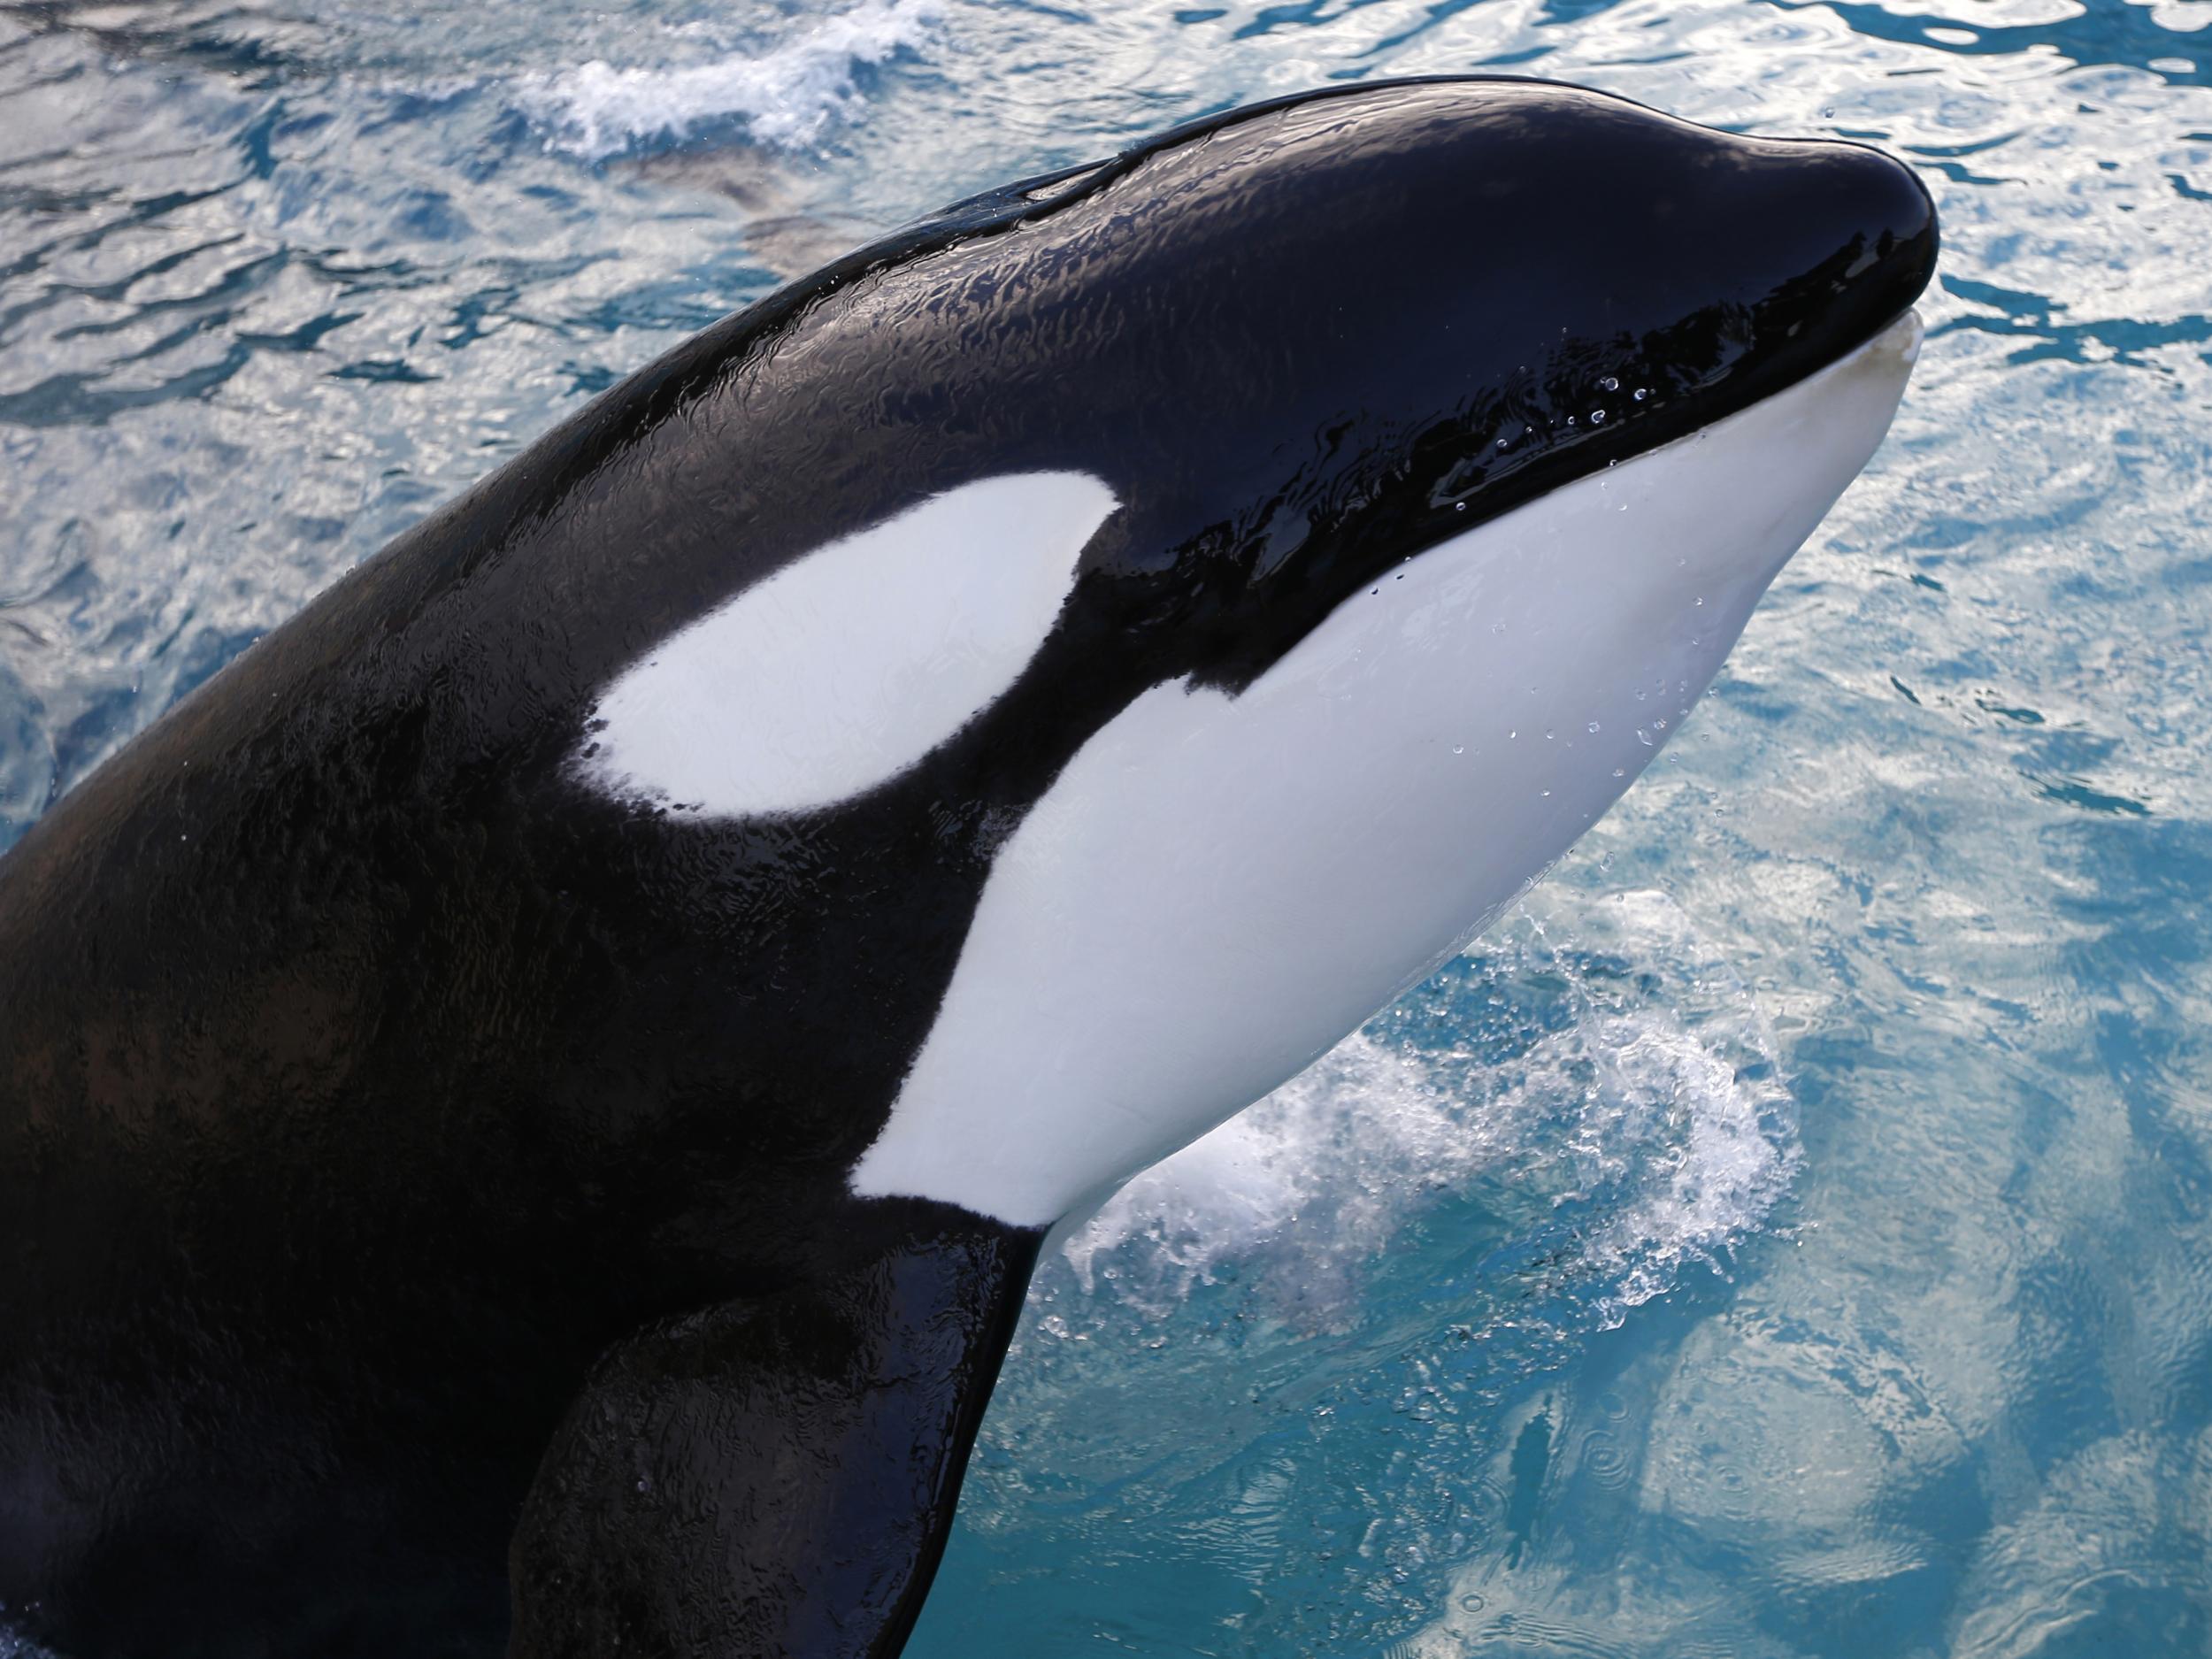 Killer whale learns to imitate human speech in world first | The ...